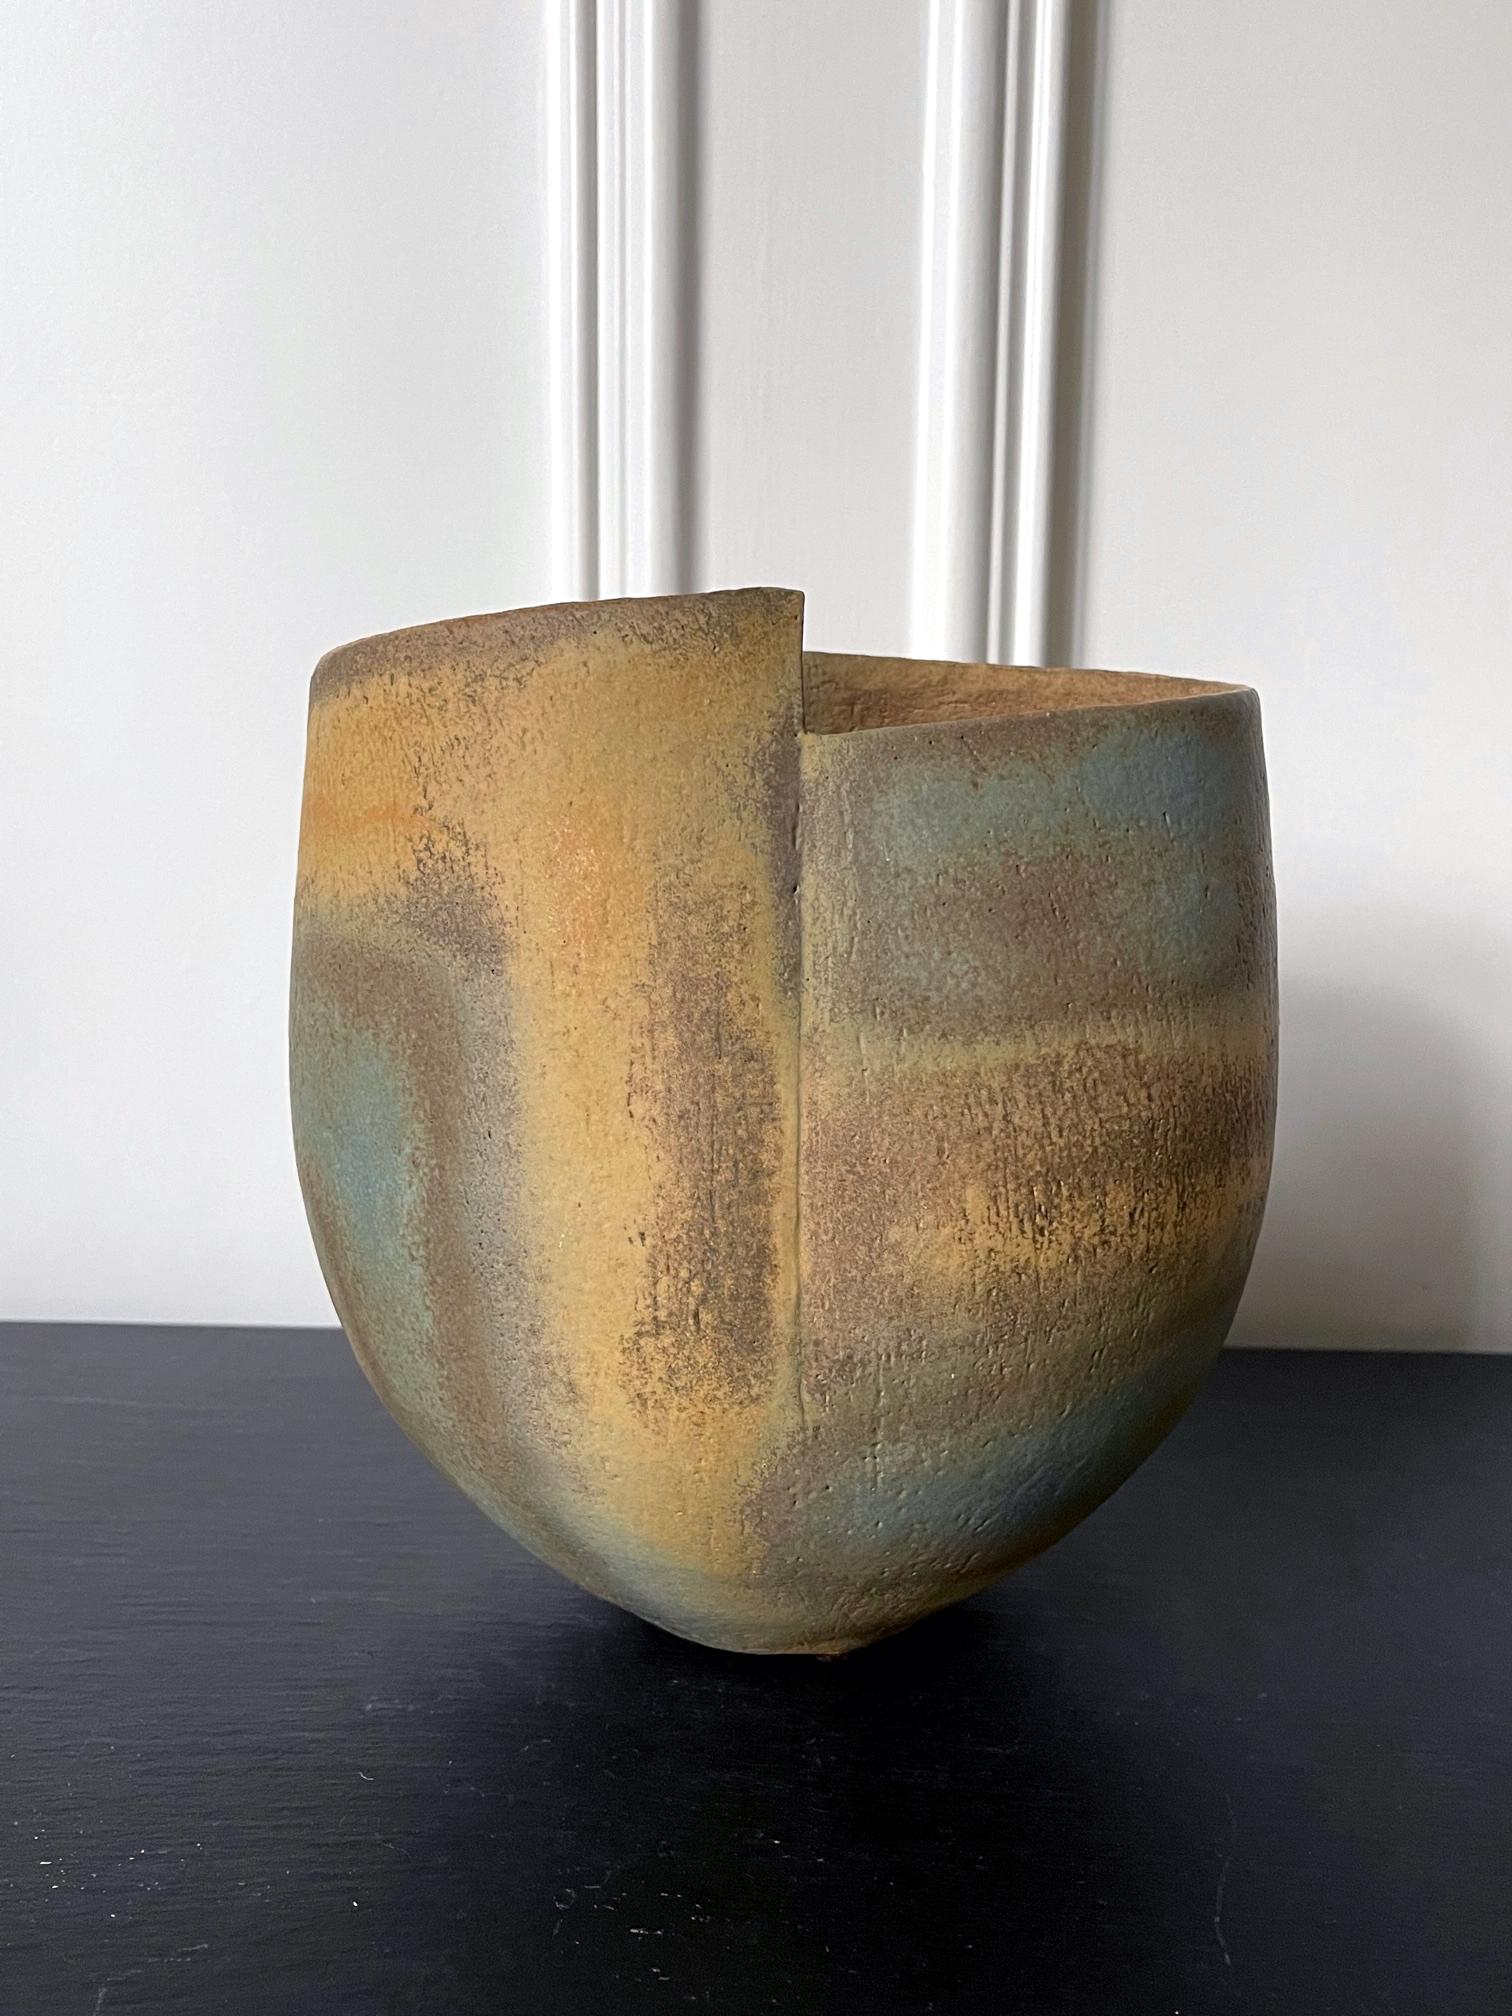 A stoneware vessel with glazed and banded stripes design by British studio ceramist John Ward (1938-2023) circa 1980s. The vessel takes its simple but distinct form between a deep bowl and a vase. It features an organic oval body with gentle curve.